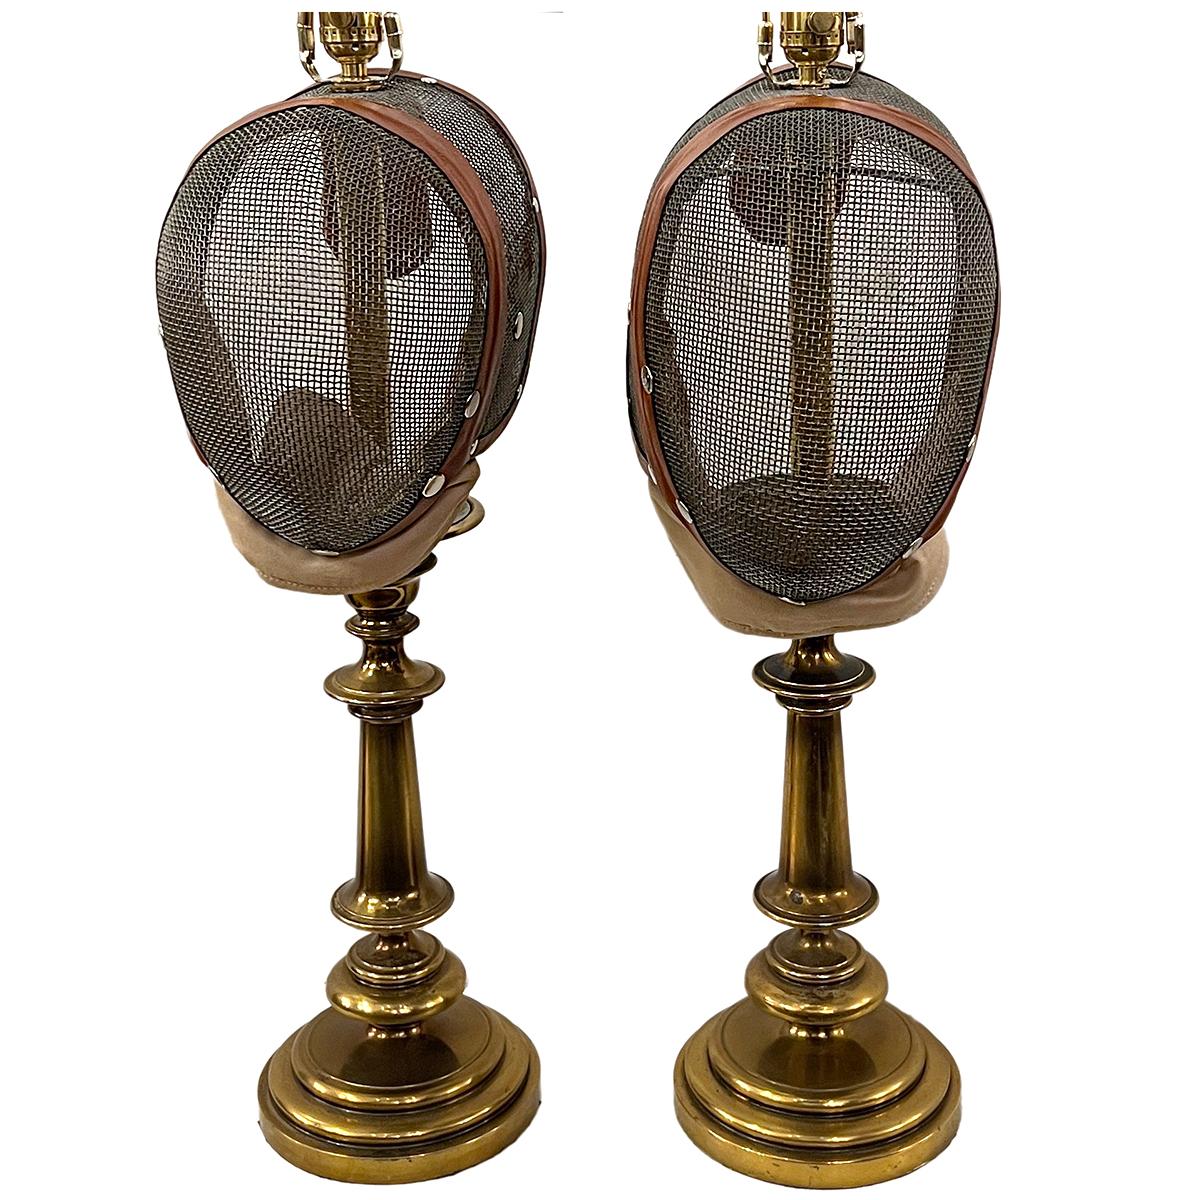 Pair of circa 1950's French fencing mask table lamps with bronze bases.

Measurements:
Height of body: 26